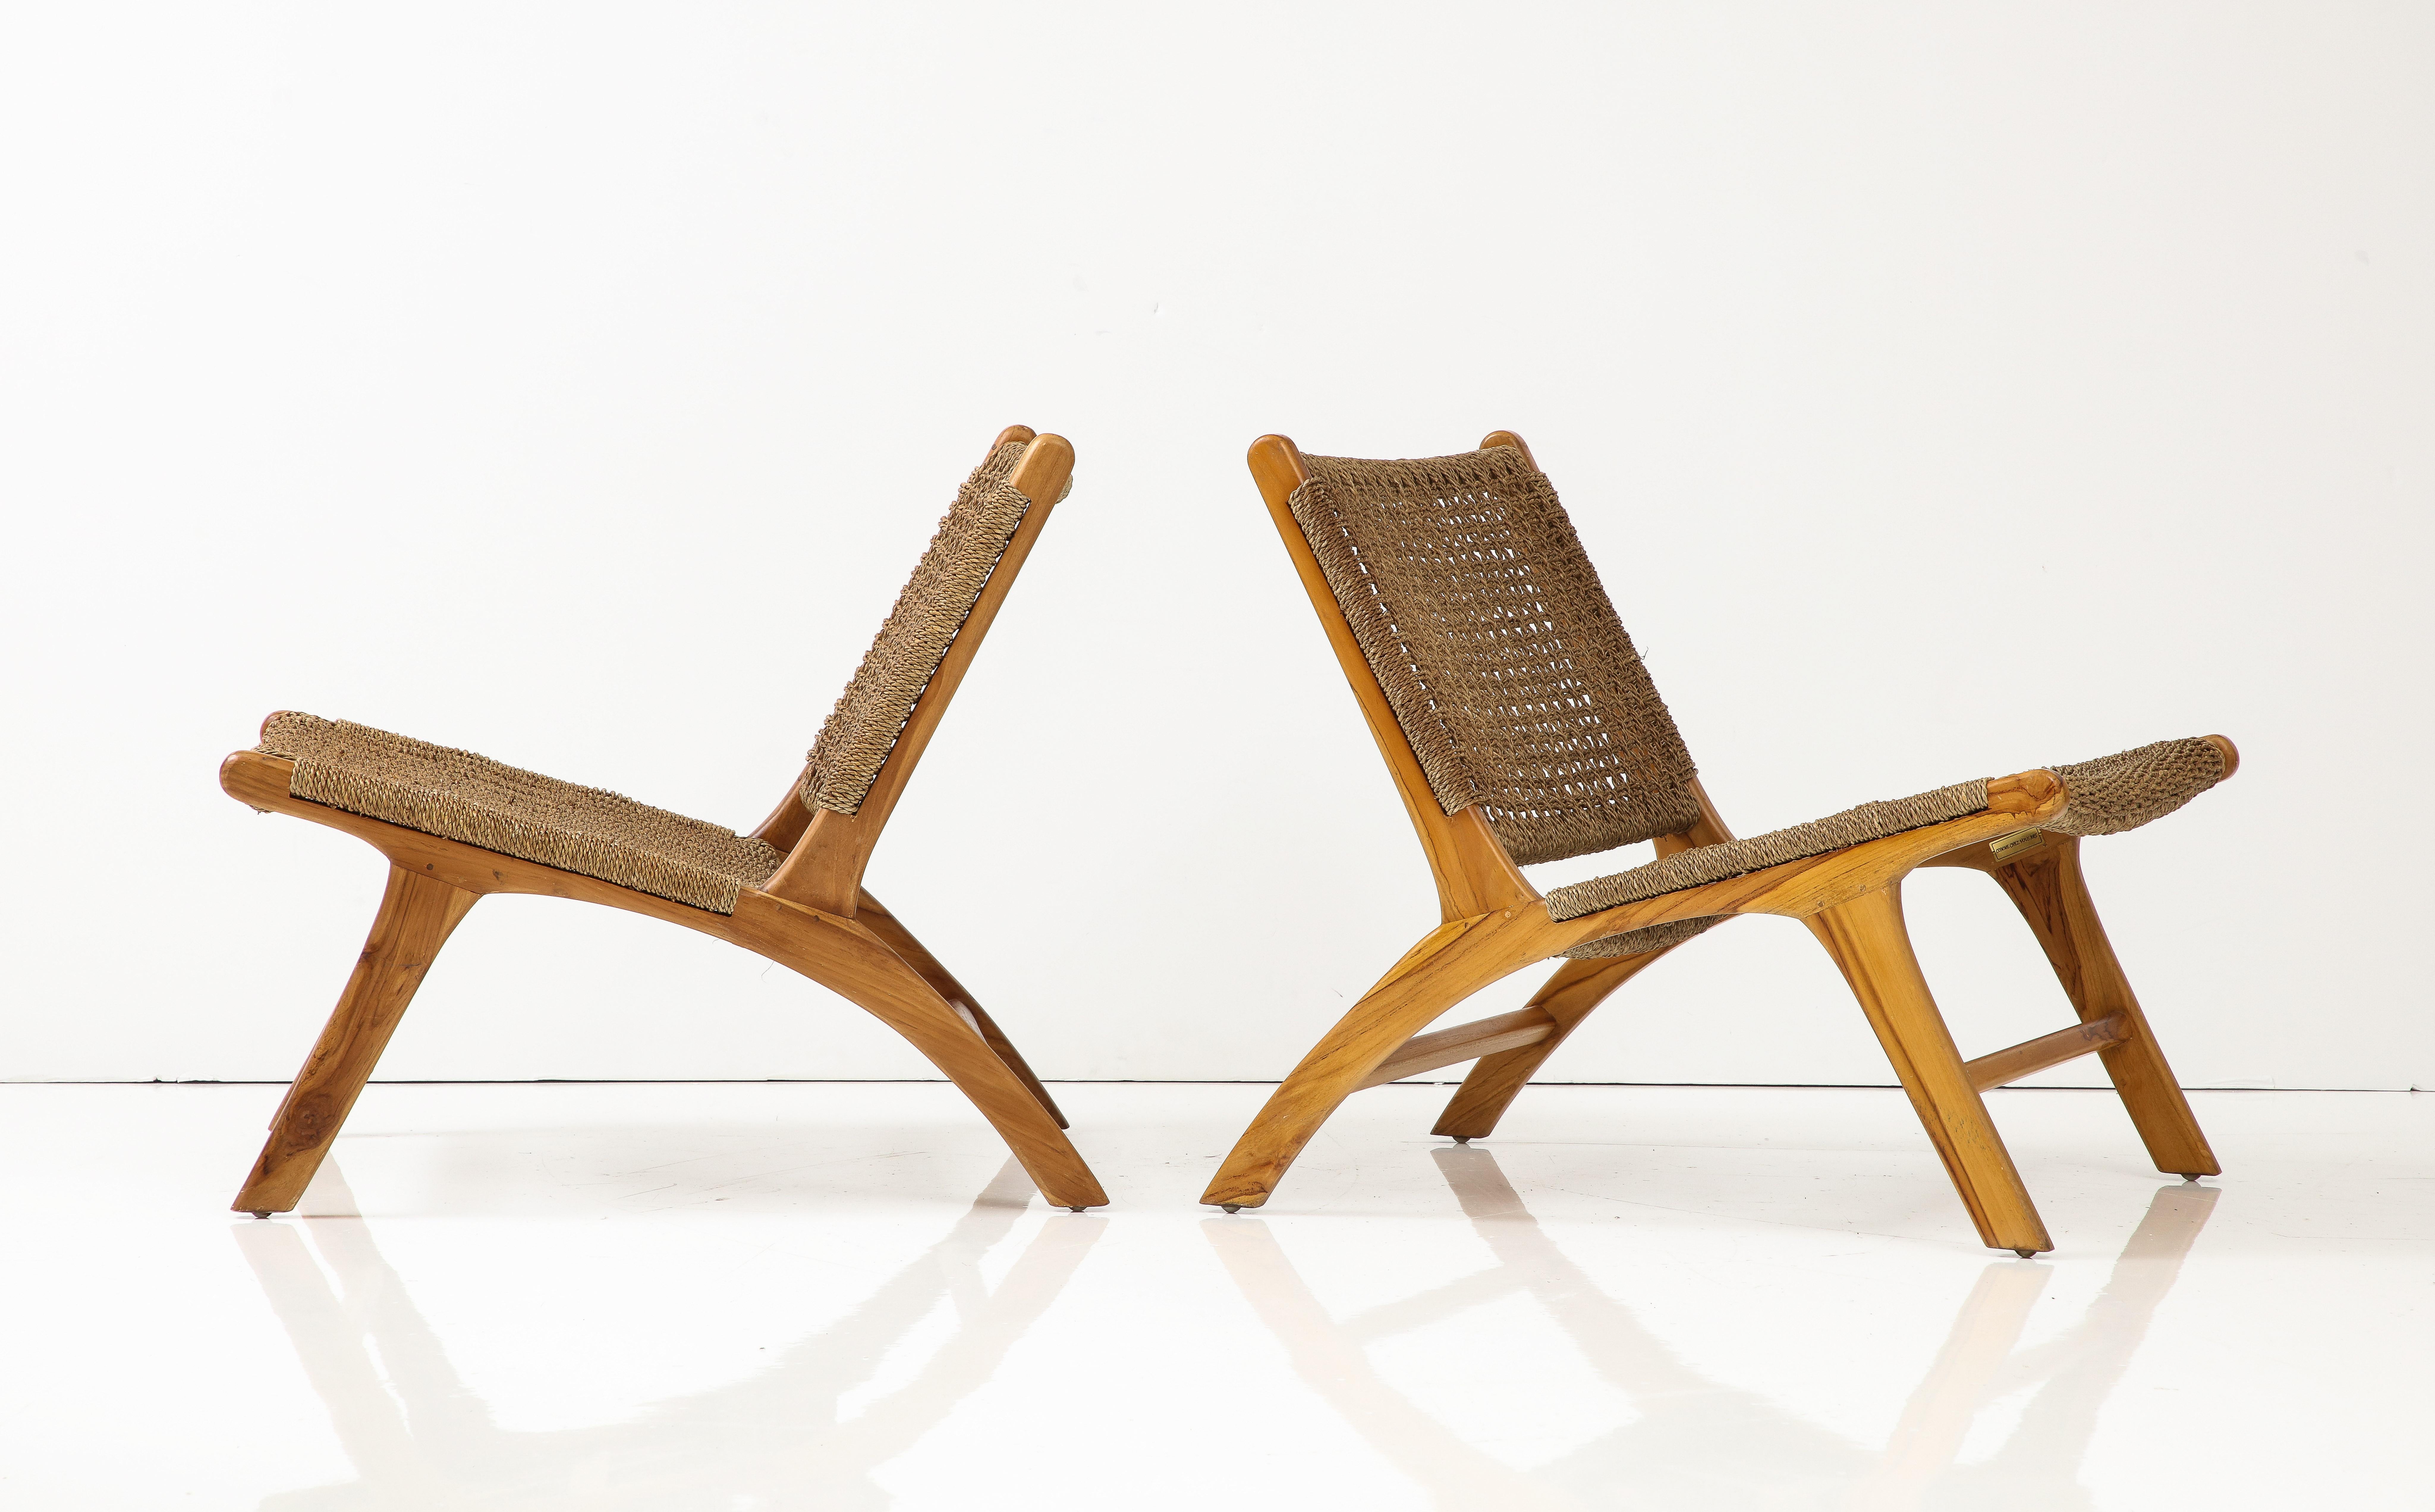 Pair of Wood & Cord Chairs, France, C. 1990s, Signed, Numbered 9